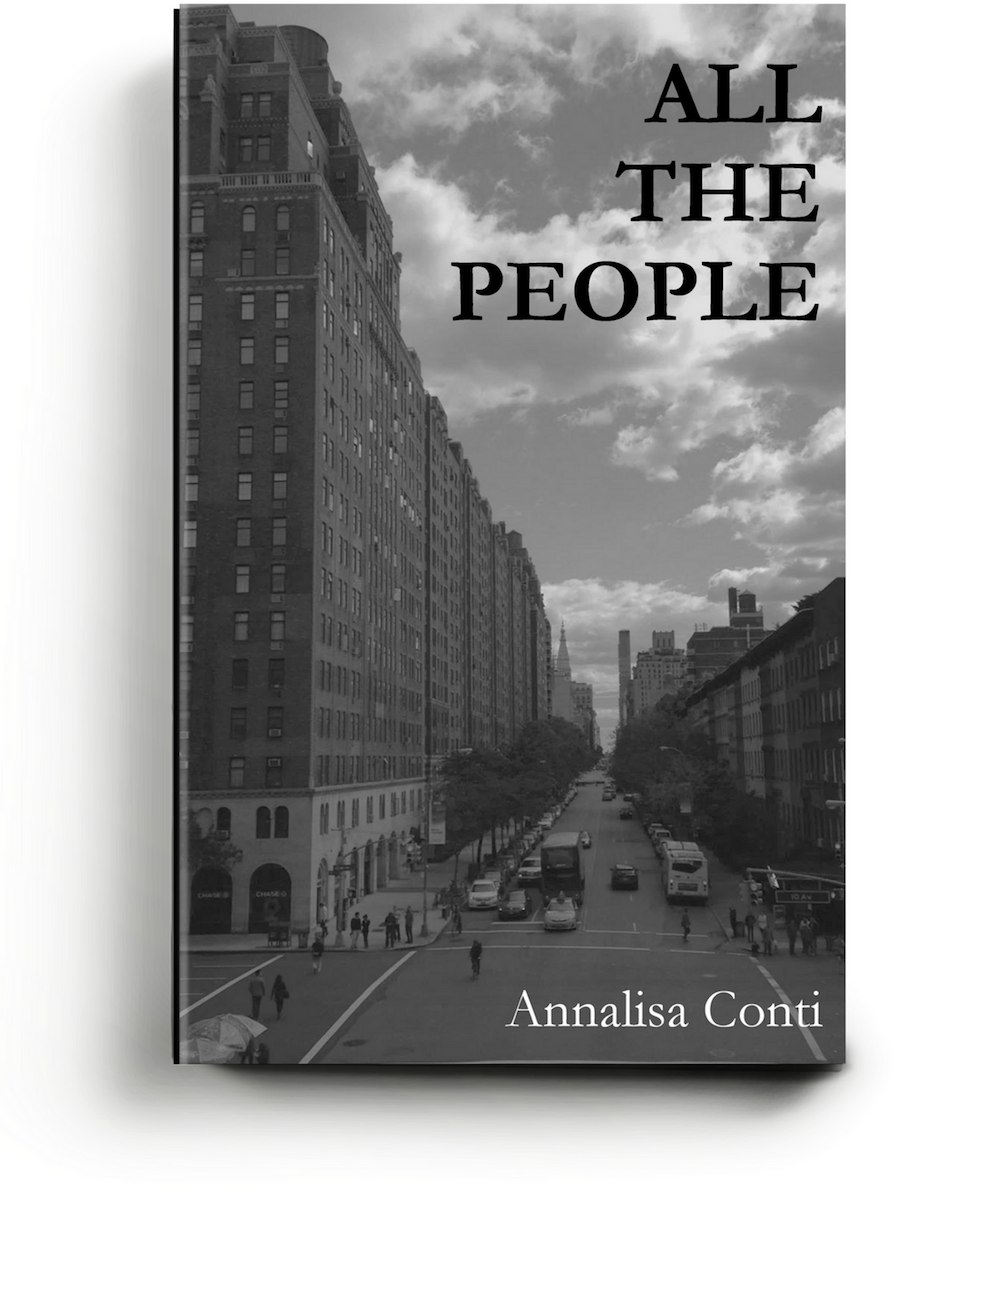 All The People by Annalisa Conti